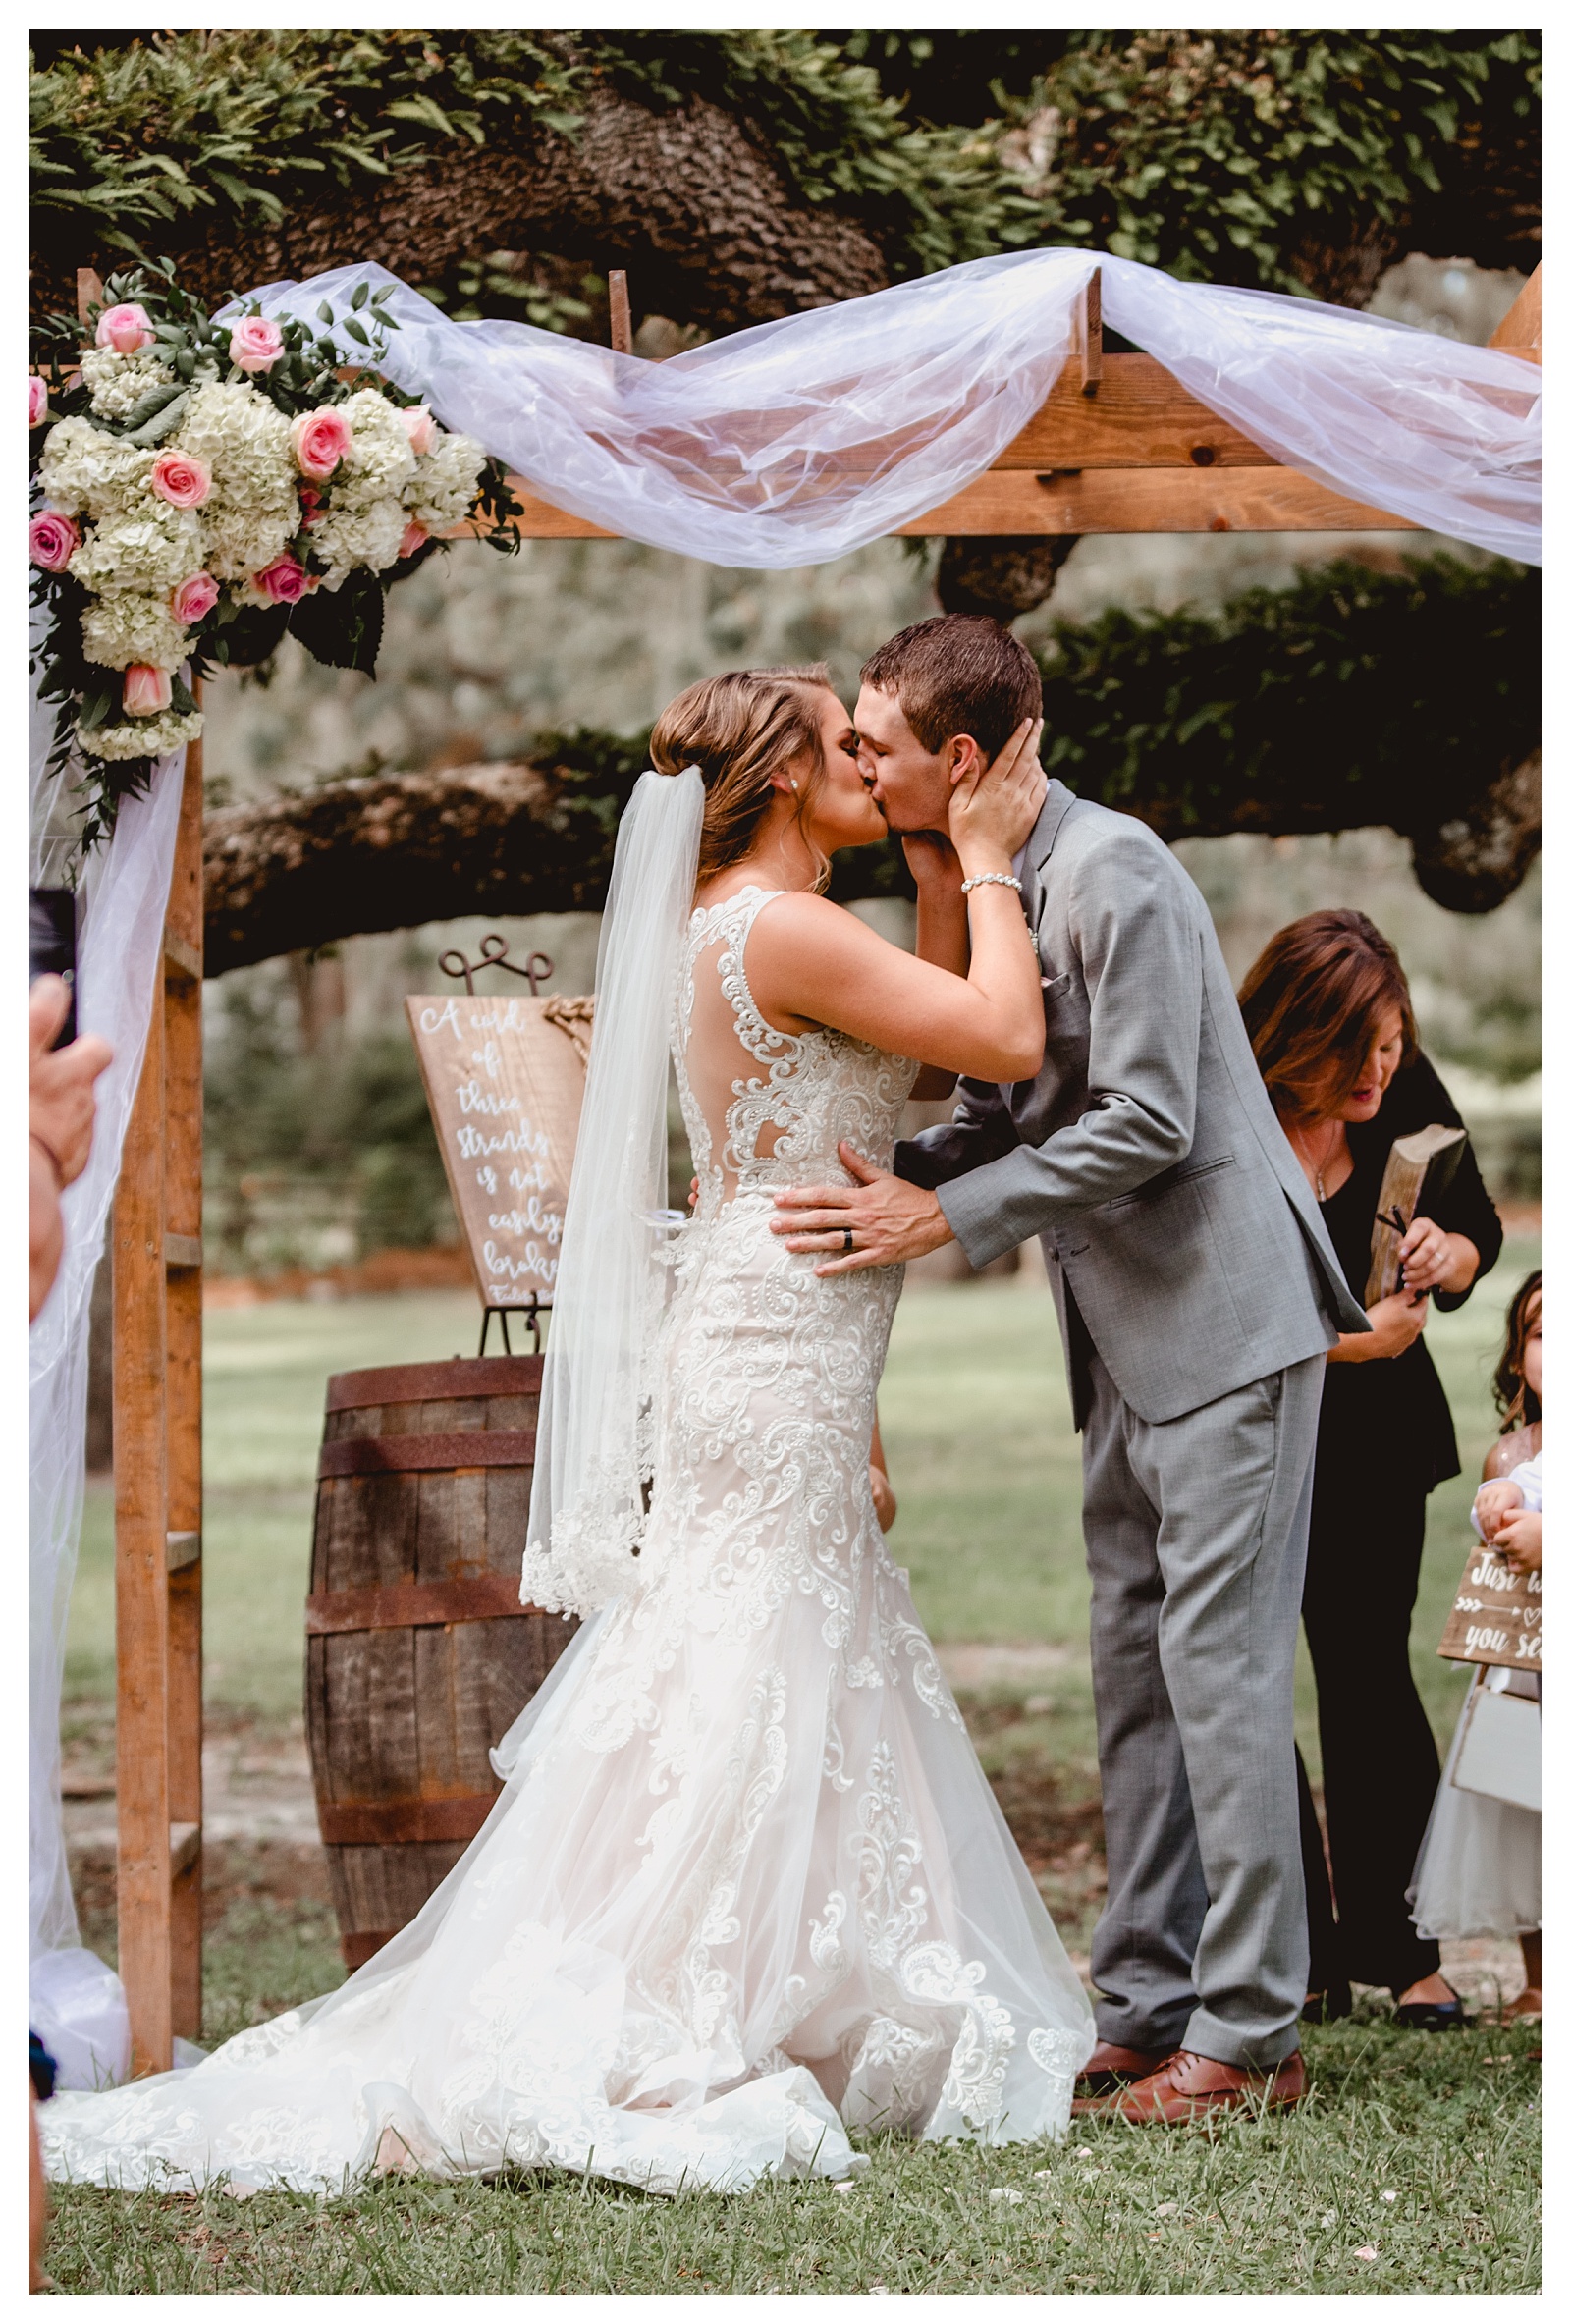 Couples first kiss as a married couple. Lake City wedding photographer Shelly Williams Photography